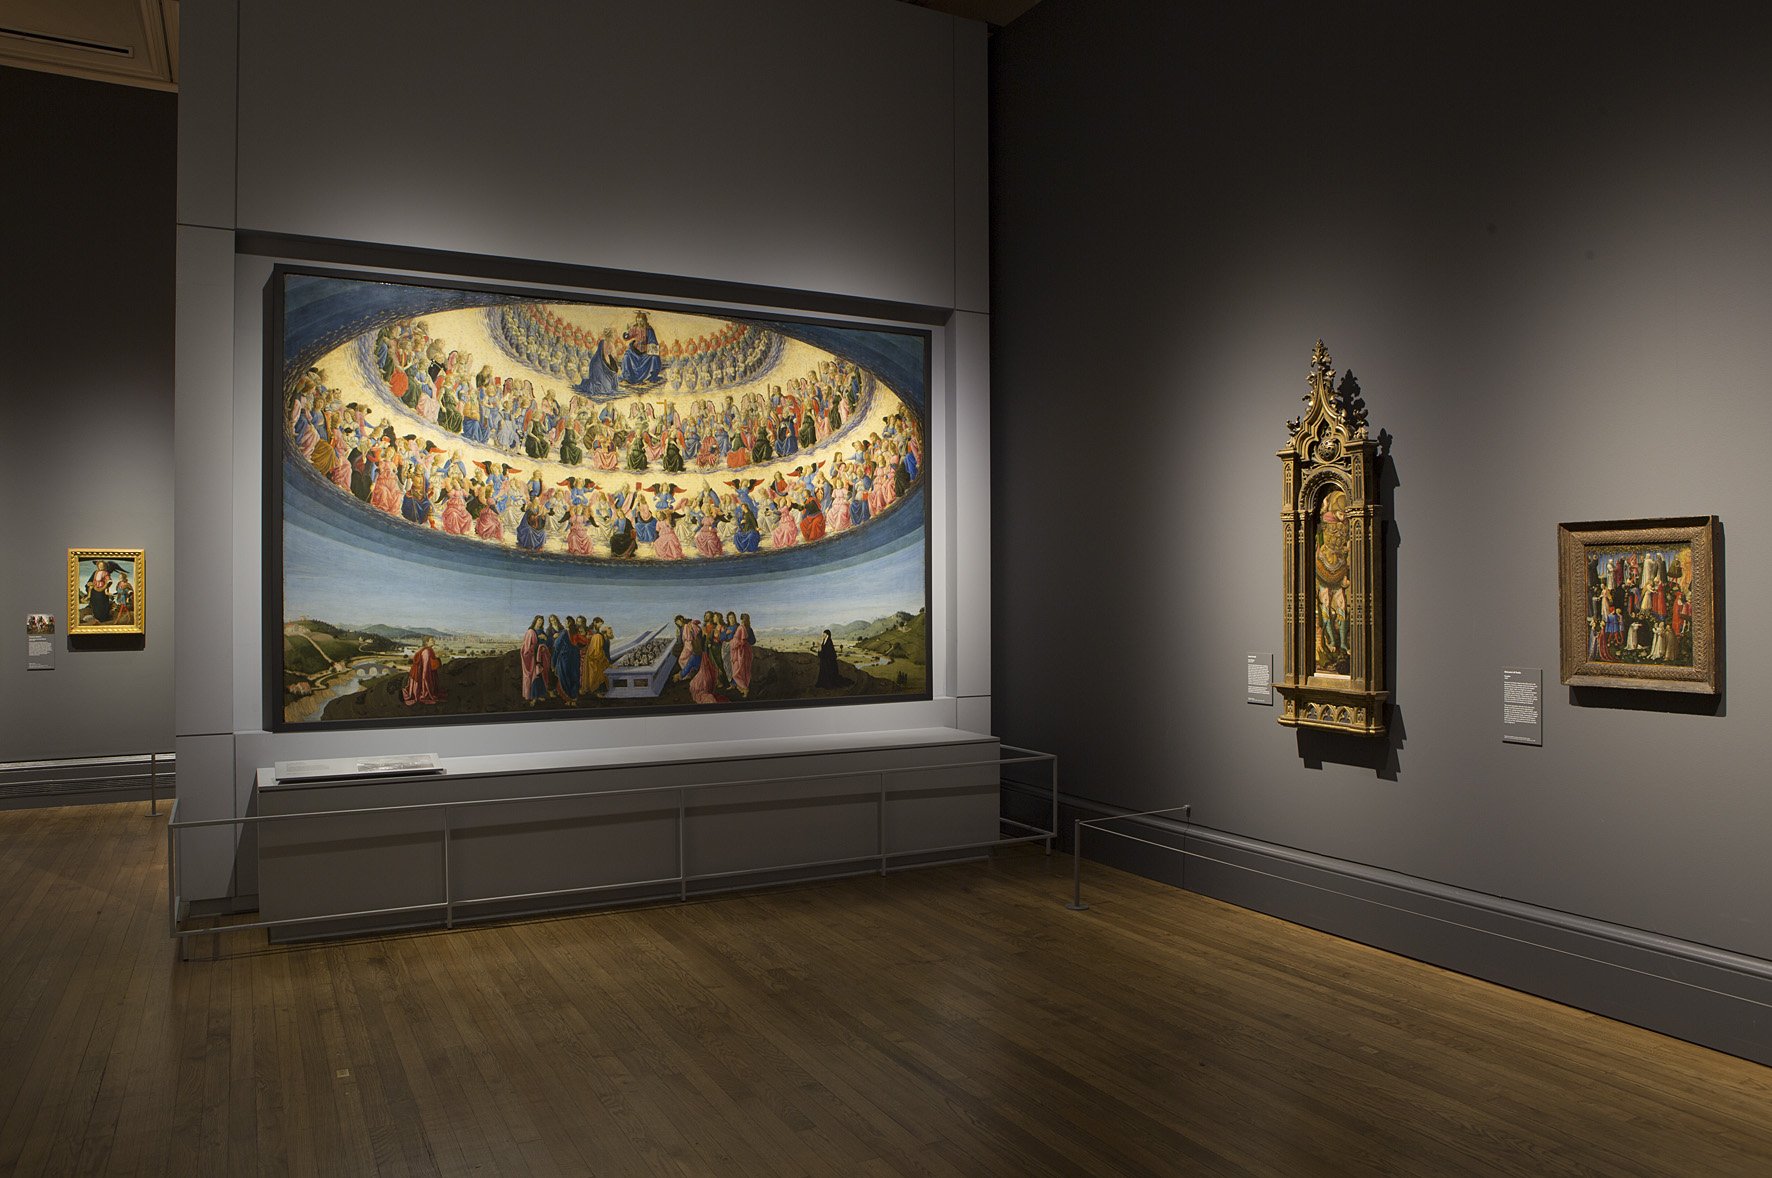 National Gallery on Twitter: "Our free #Botticini exhibition showcases new research on 'Assumption of the Virgin': https://t.co/kXLBktWlgk https://t.co/aweLujlOaY" / Twitter